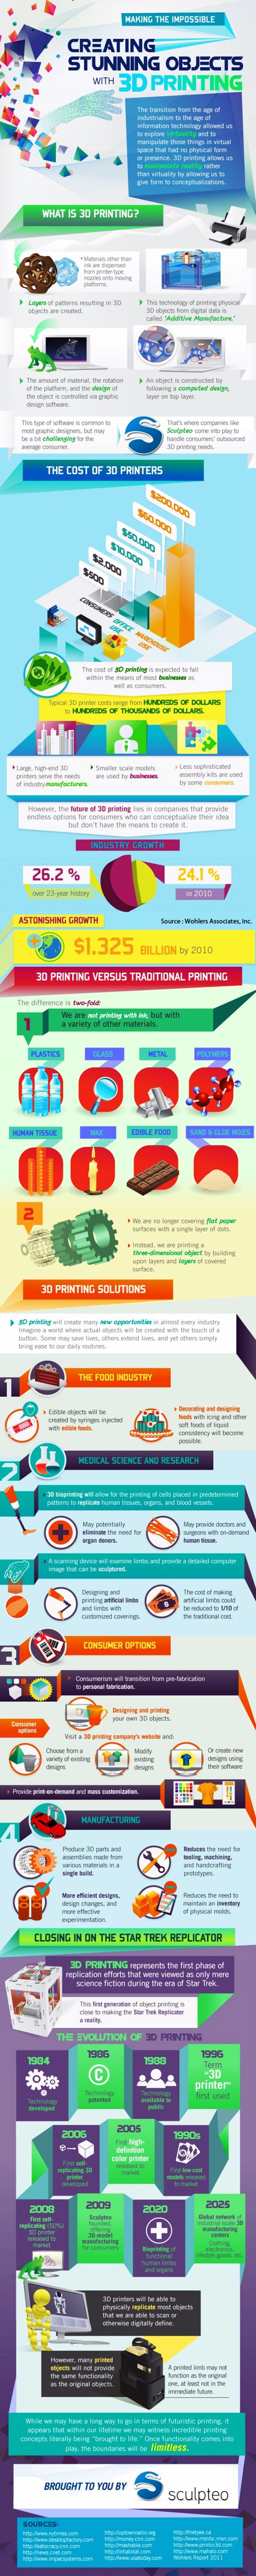 Drone Infographics : Creating Stunning Objects with 3D Printing Infographic. Top...